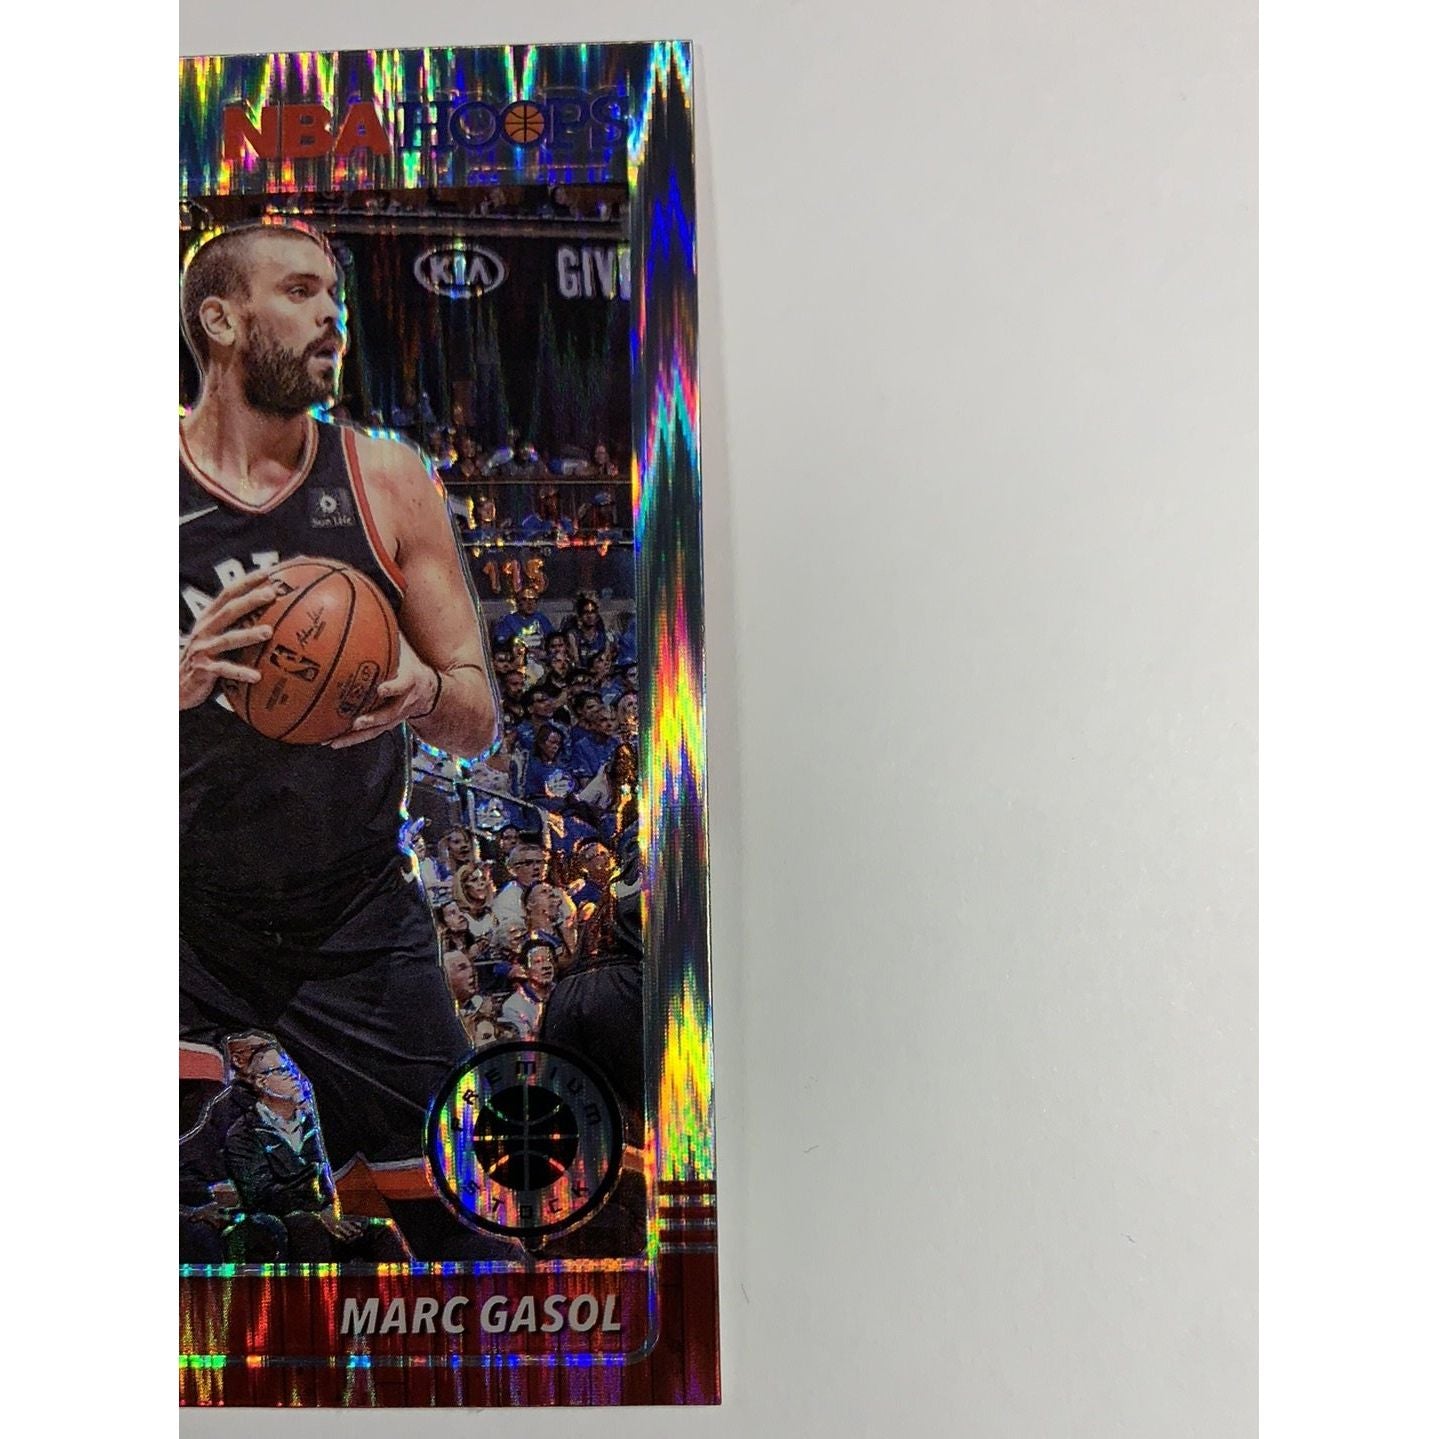  2019-20 Hoops Premium Stock Marc Gasol Hyper Flash Prizm  Local Legends Cards & Collectibles